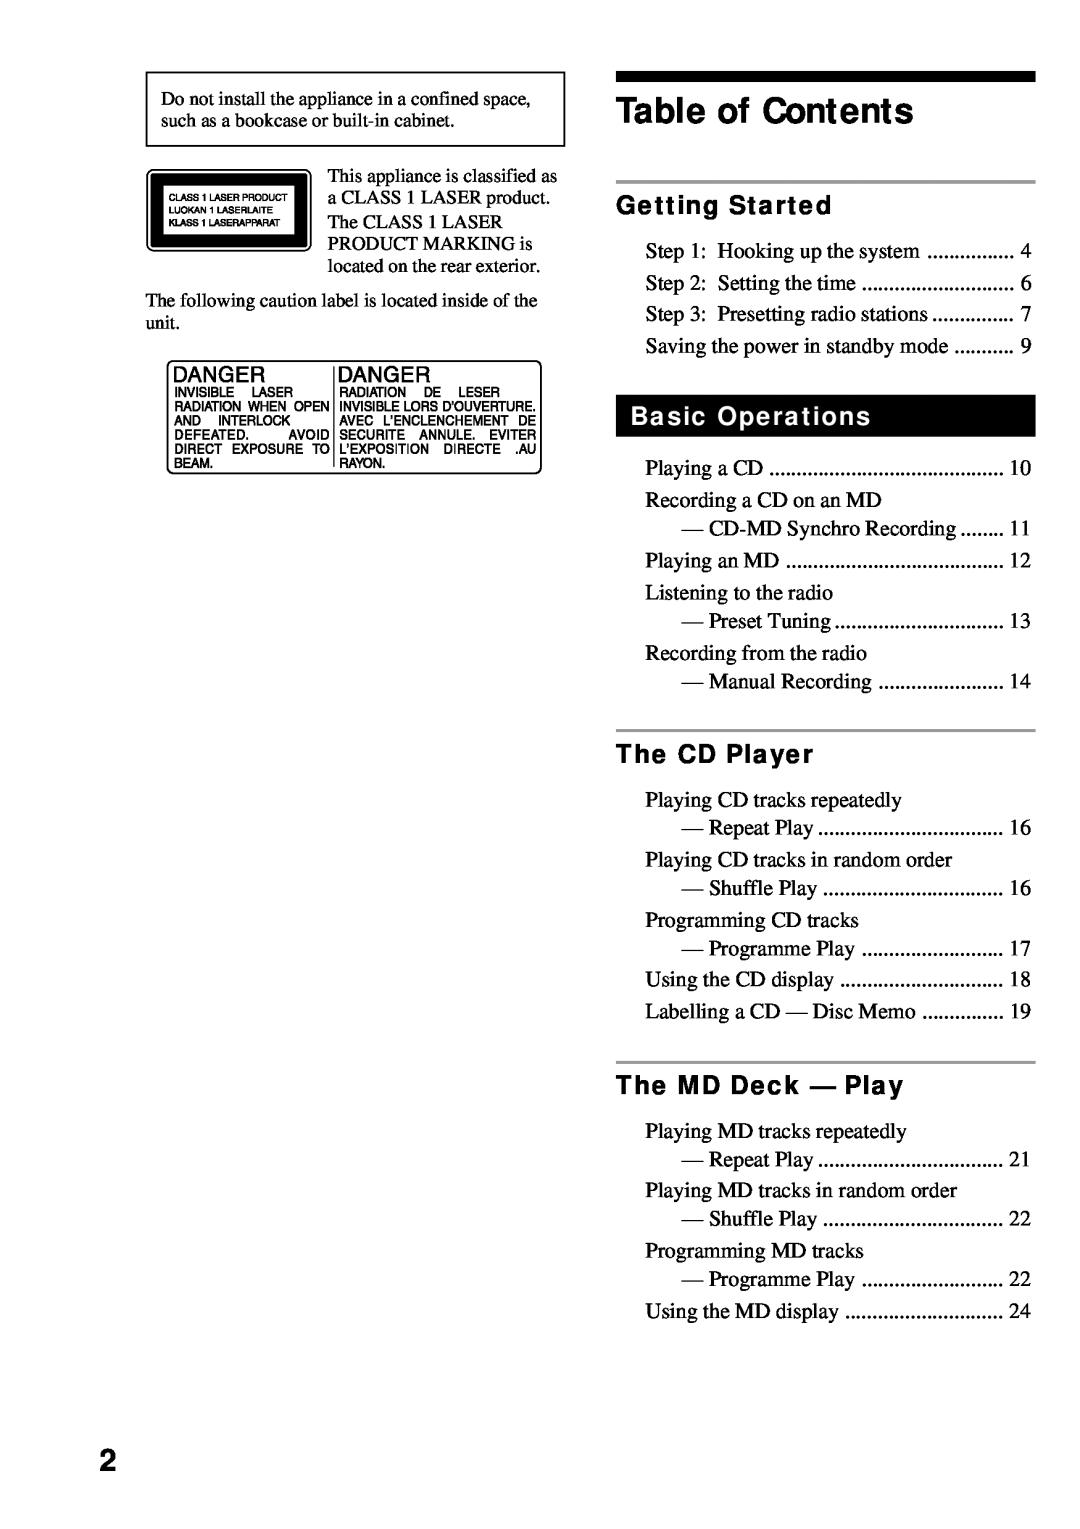 Sony DHC-MD373 manual Table of Contents, Getting Started, The CD Player, The MD Deck - Play, Basic Operations 